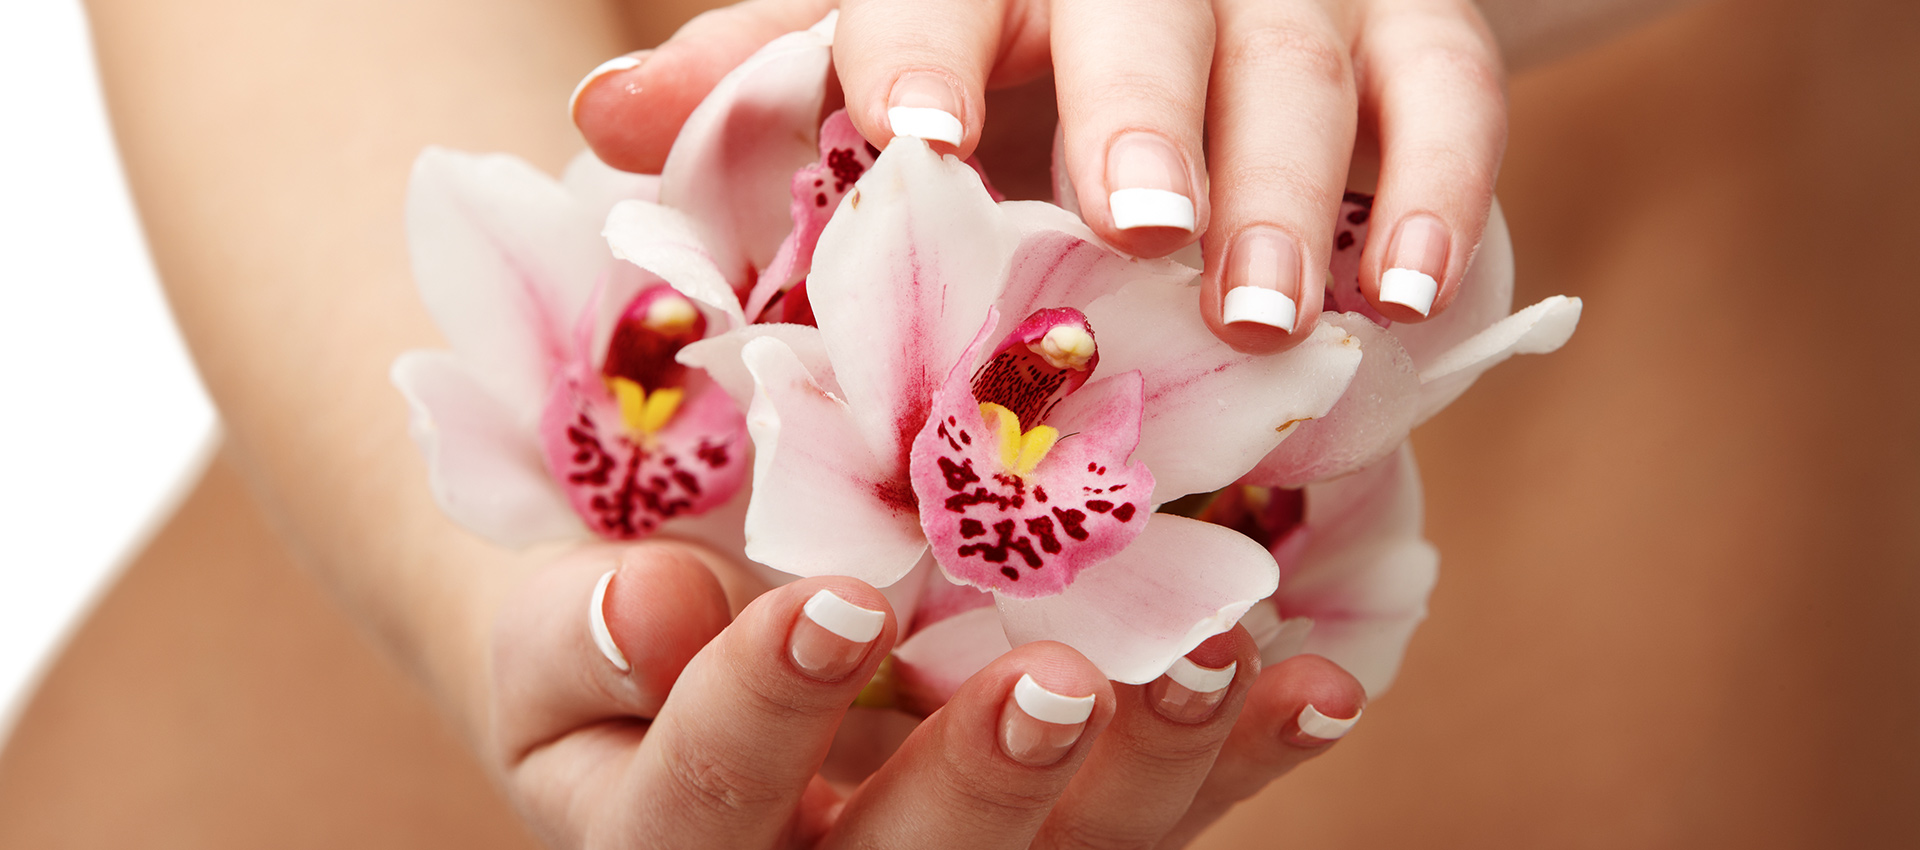 T B Nice One Nails: Nails, Waxing and Pedicures in Calgary and Chestermere